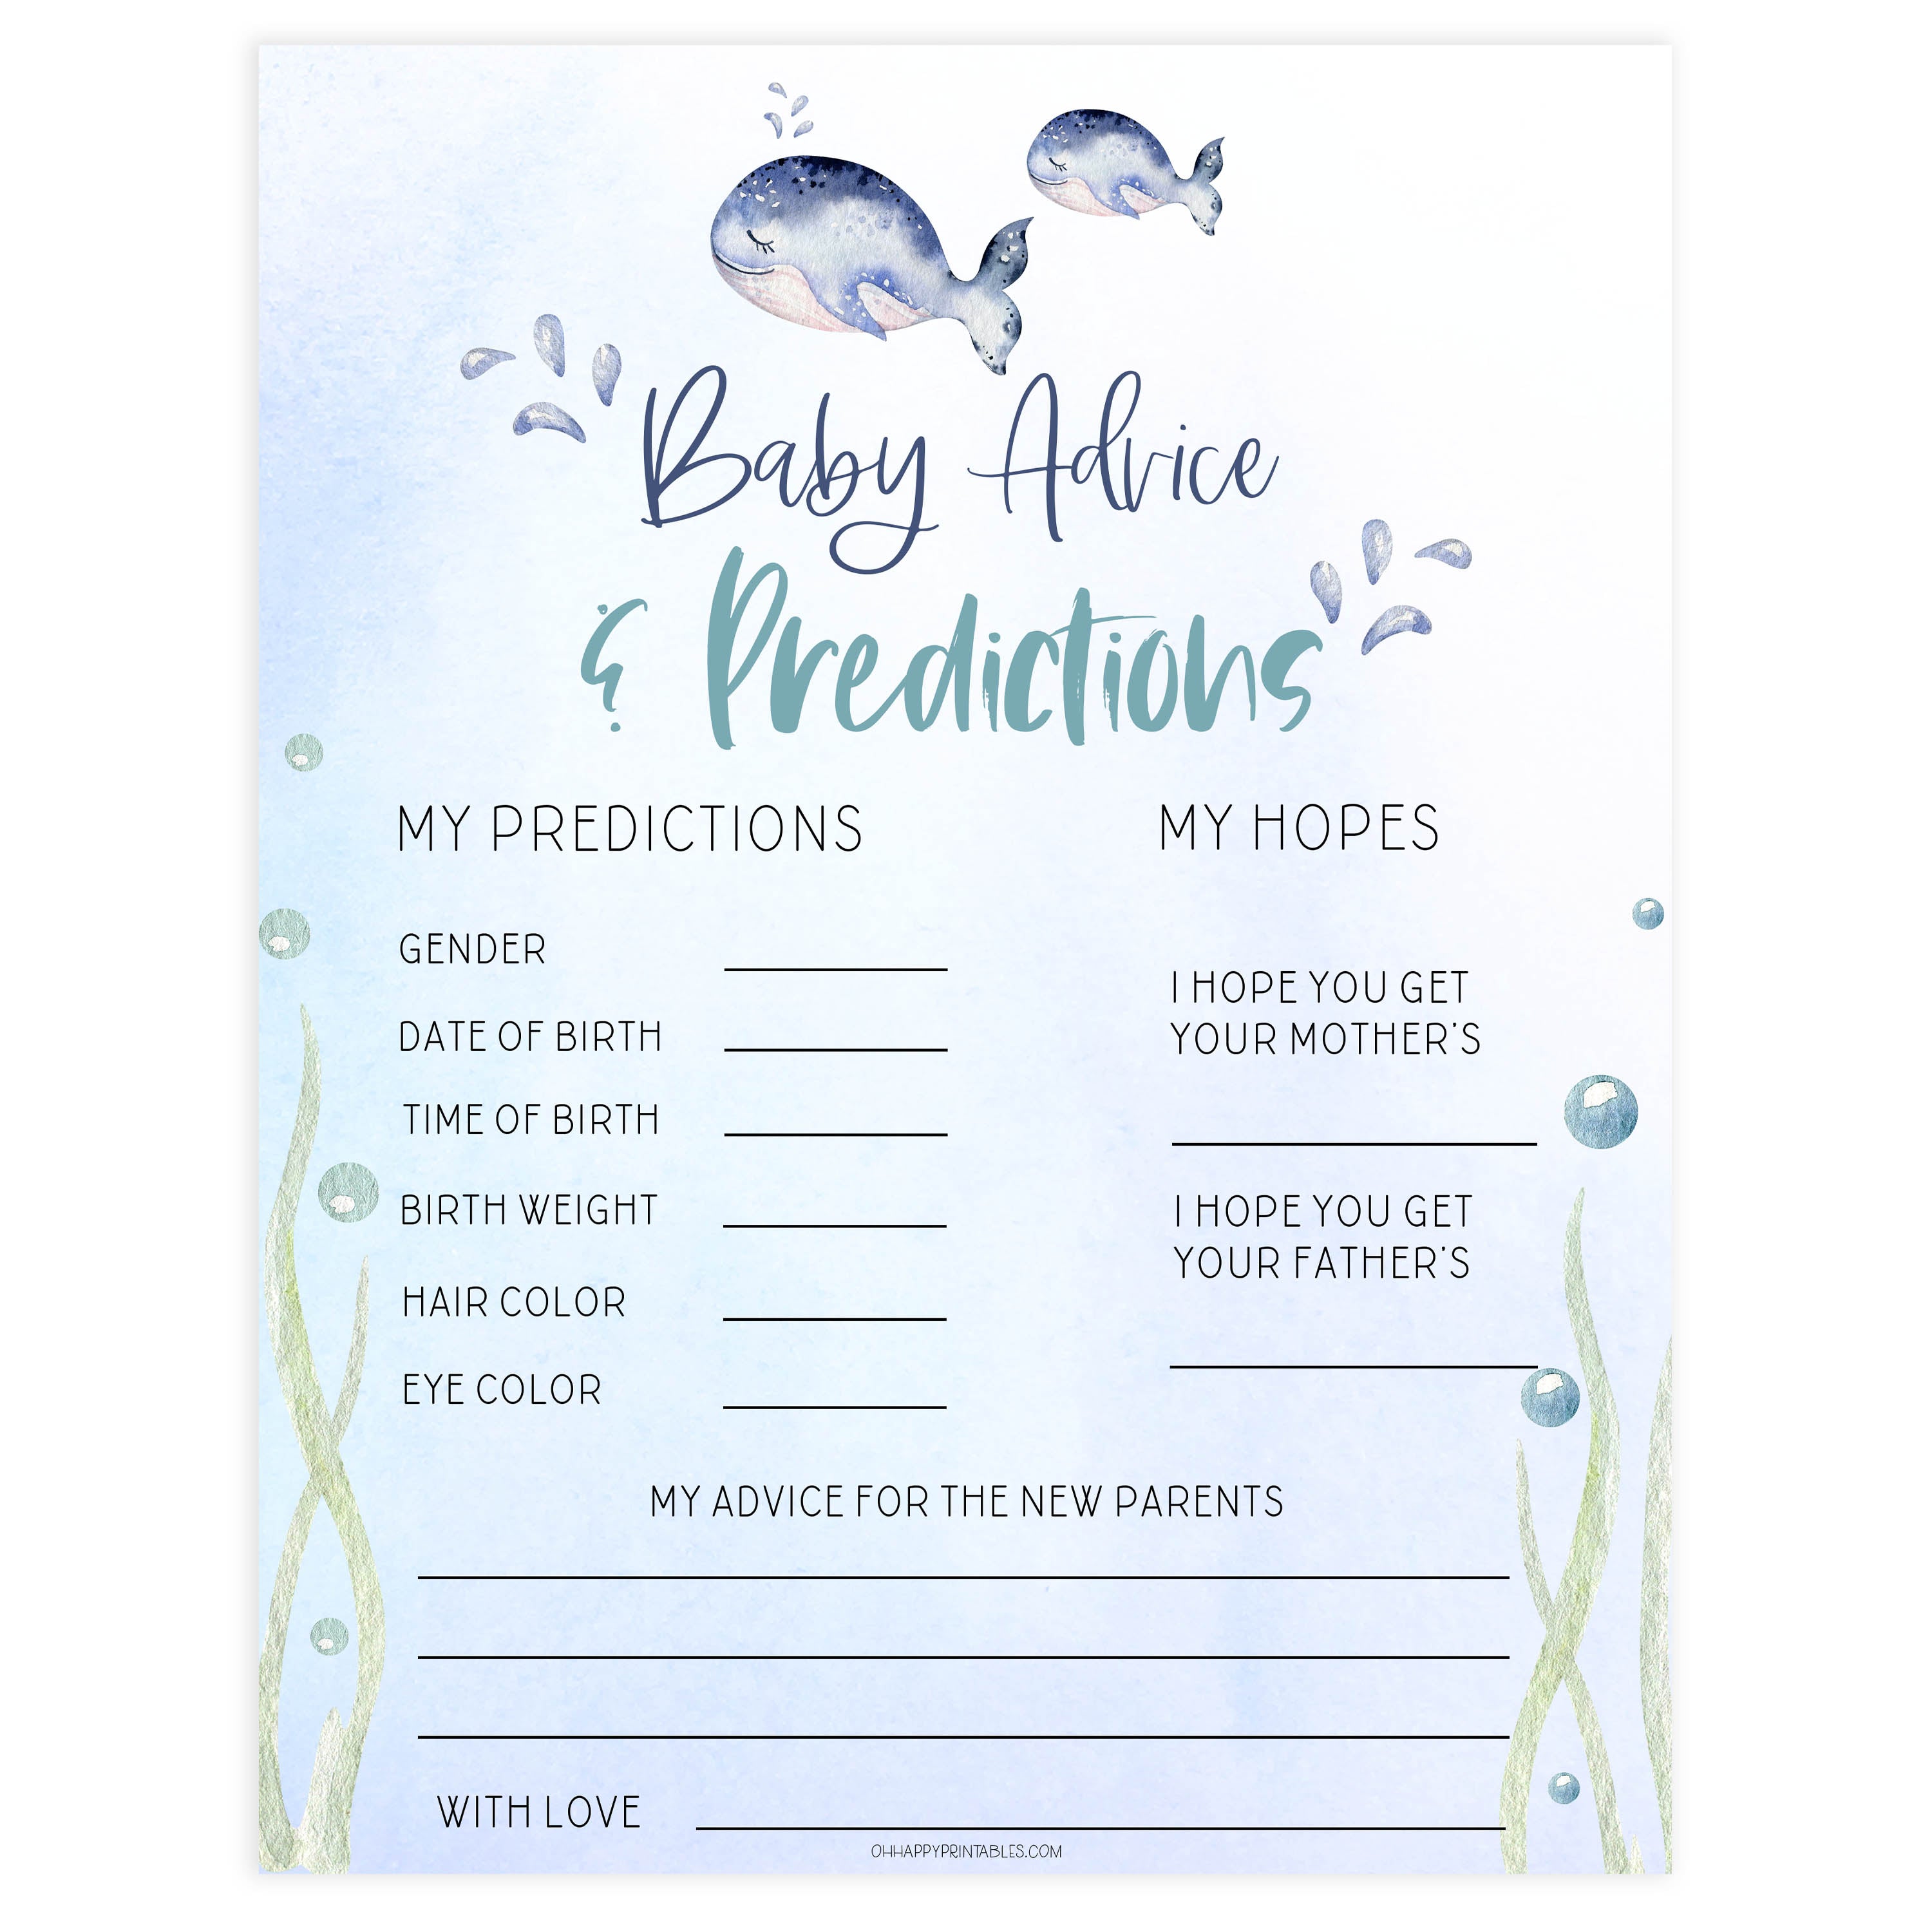 baby advice and predictions game, Printable baby shower games, whale baby games, baby shower games, fun baby shower ideas, top baby shower ideas, whale baby shower, baby shower games, fun whale baby shower ideas